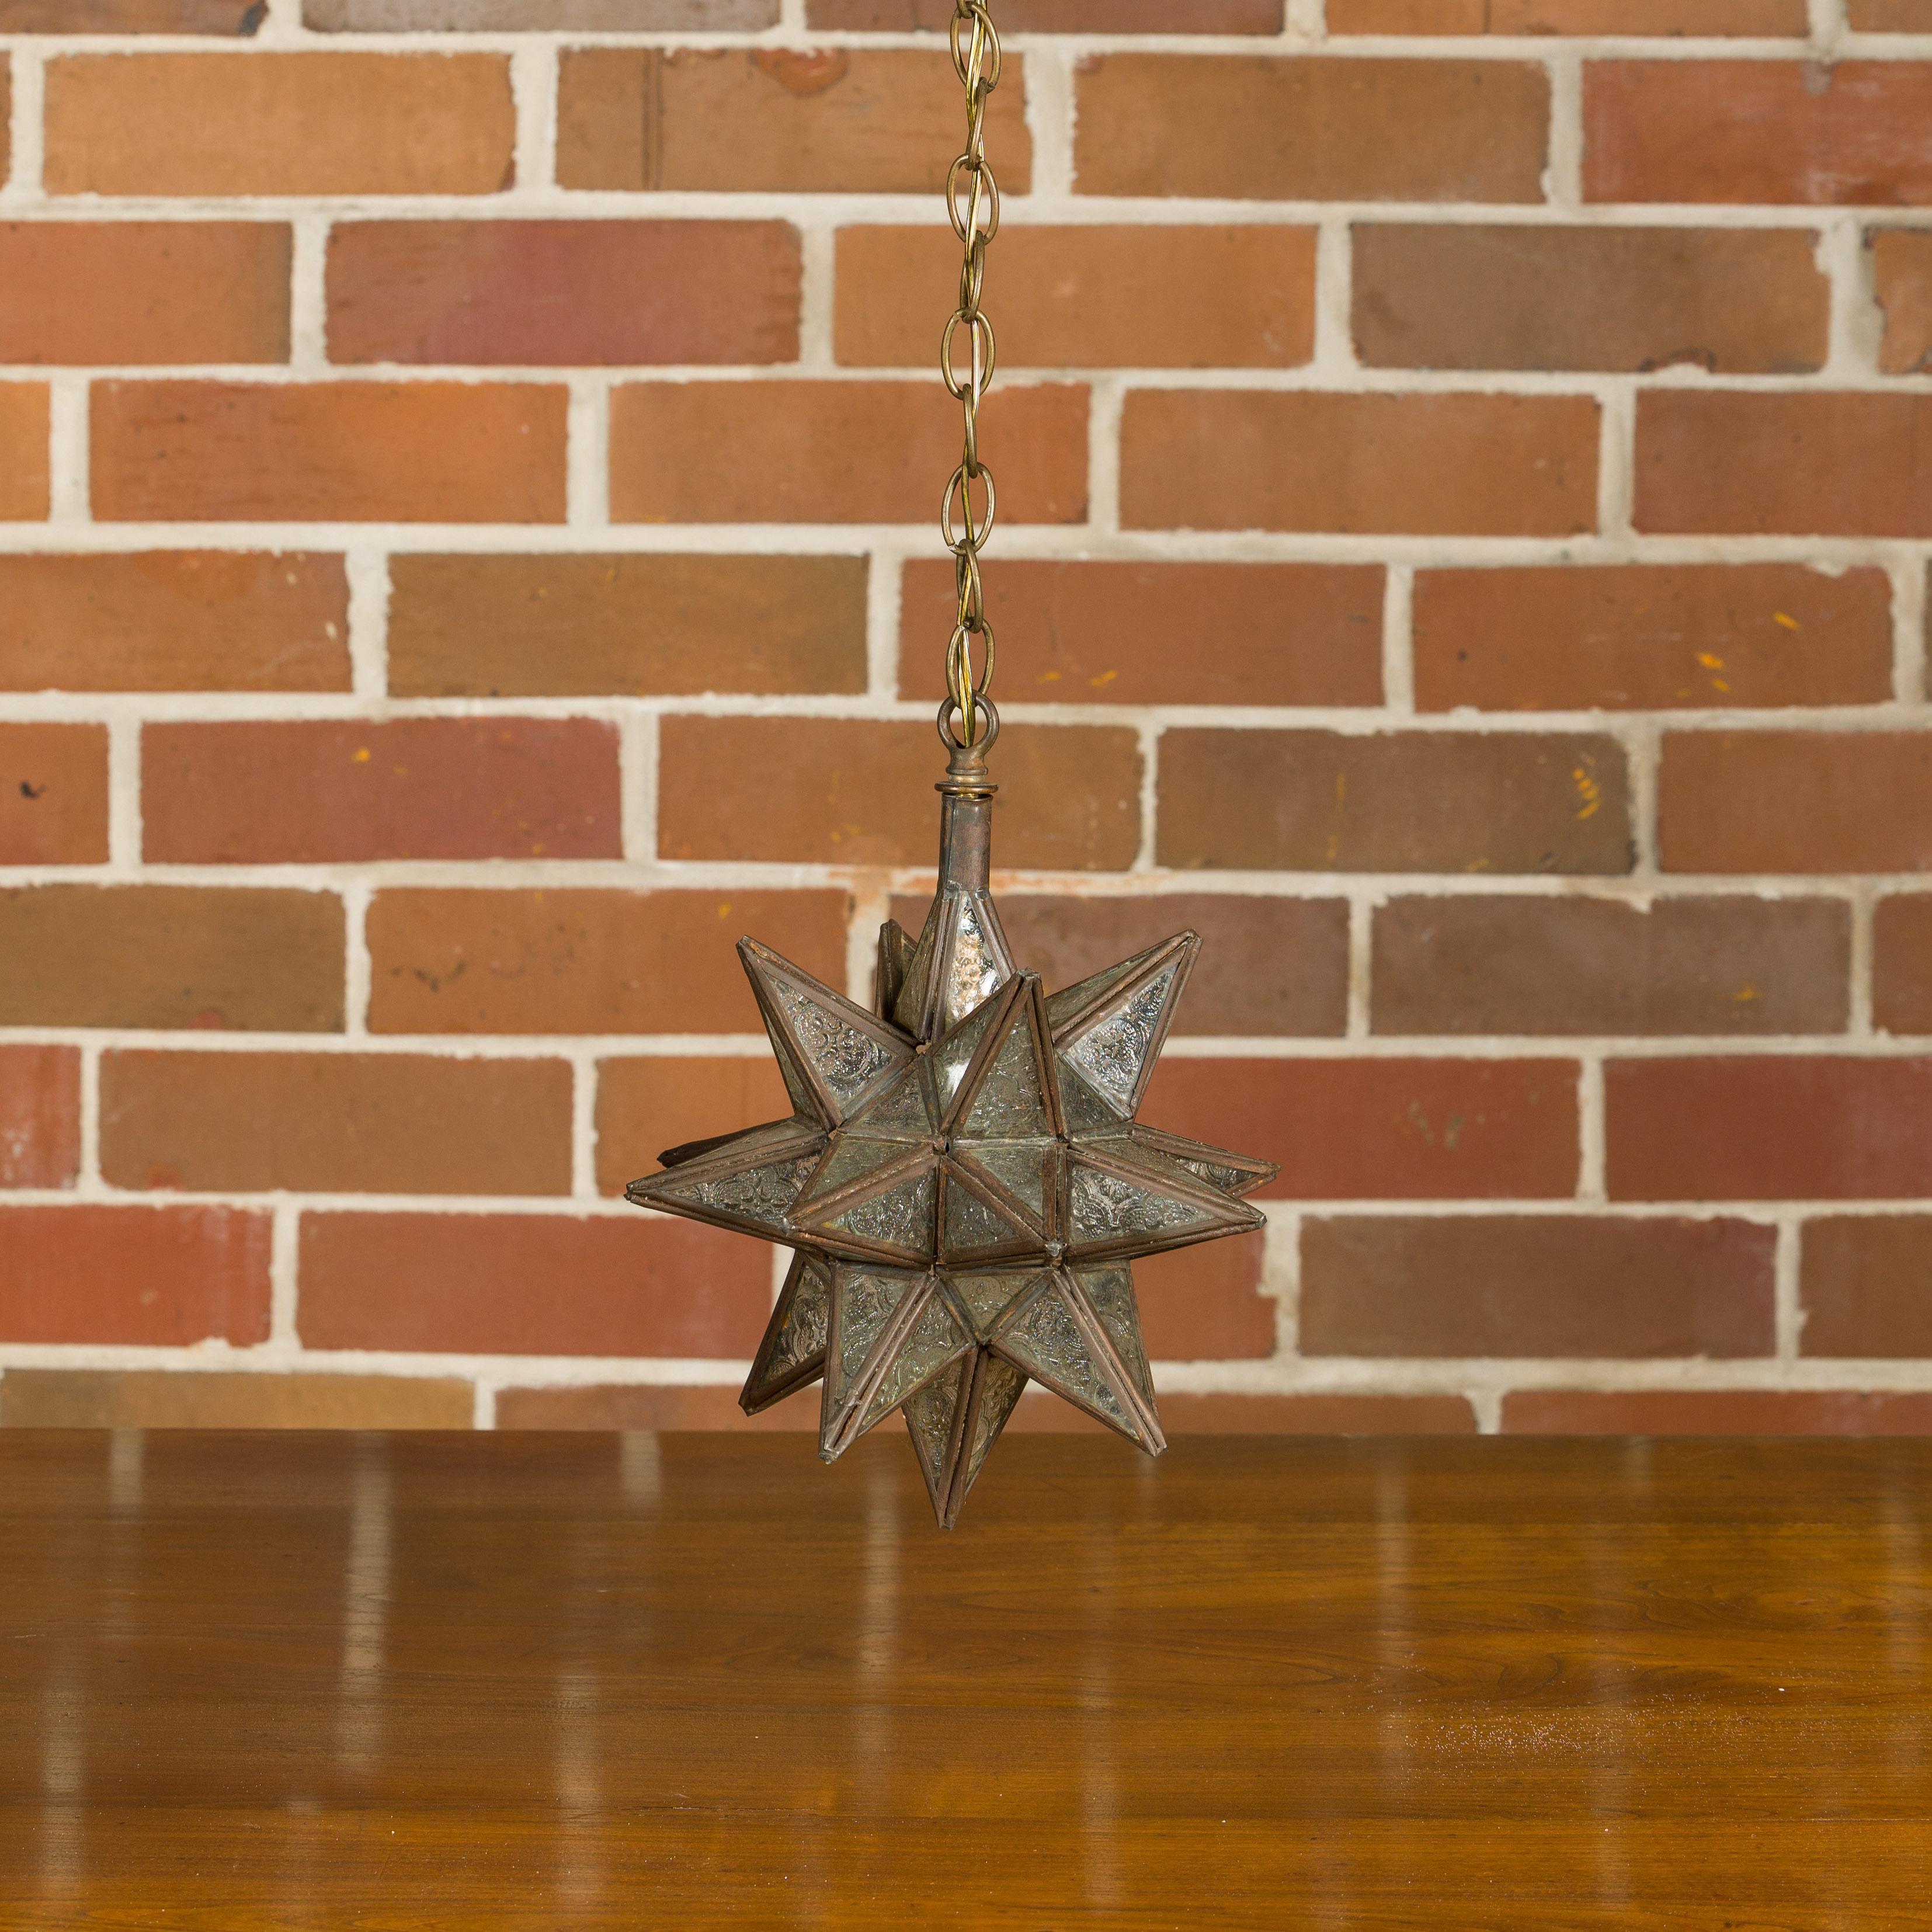 A French Midcentury star light fixture with textured glass panels surrounding a central socket. Dive into the celestial allure of this French Midcentury star light fixture, a captivating addition to any interior space that yearns for a touch of